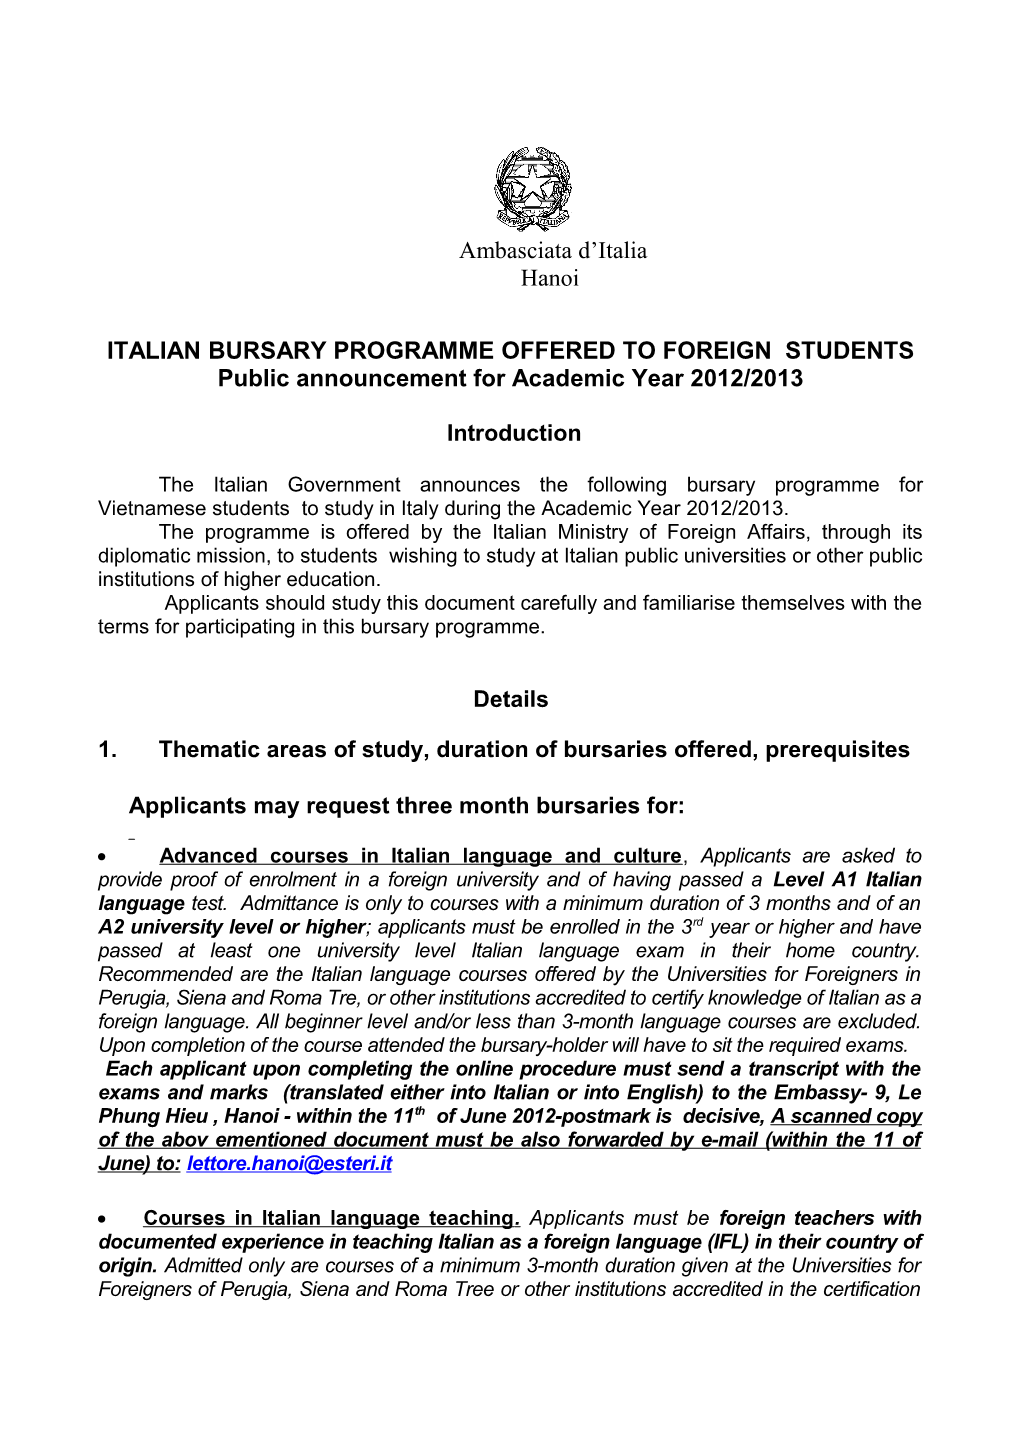 Italian Bursary Programme Offered to Foreign Students